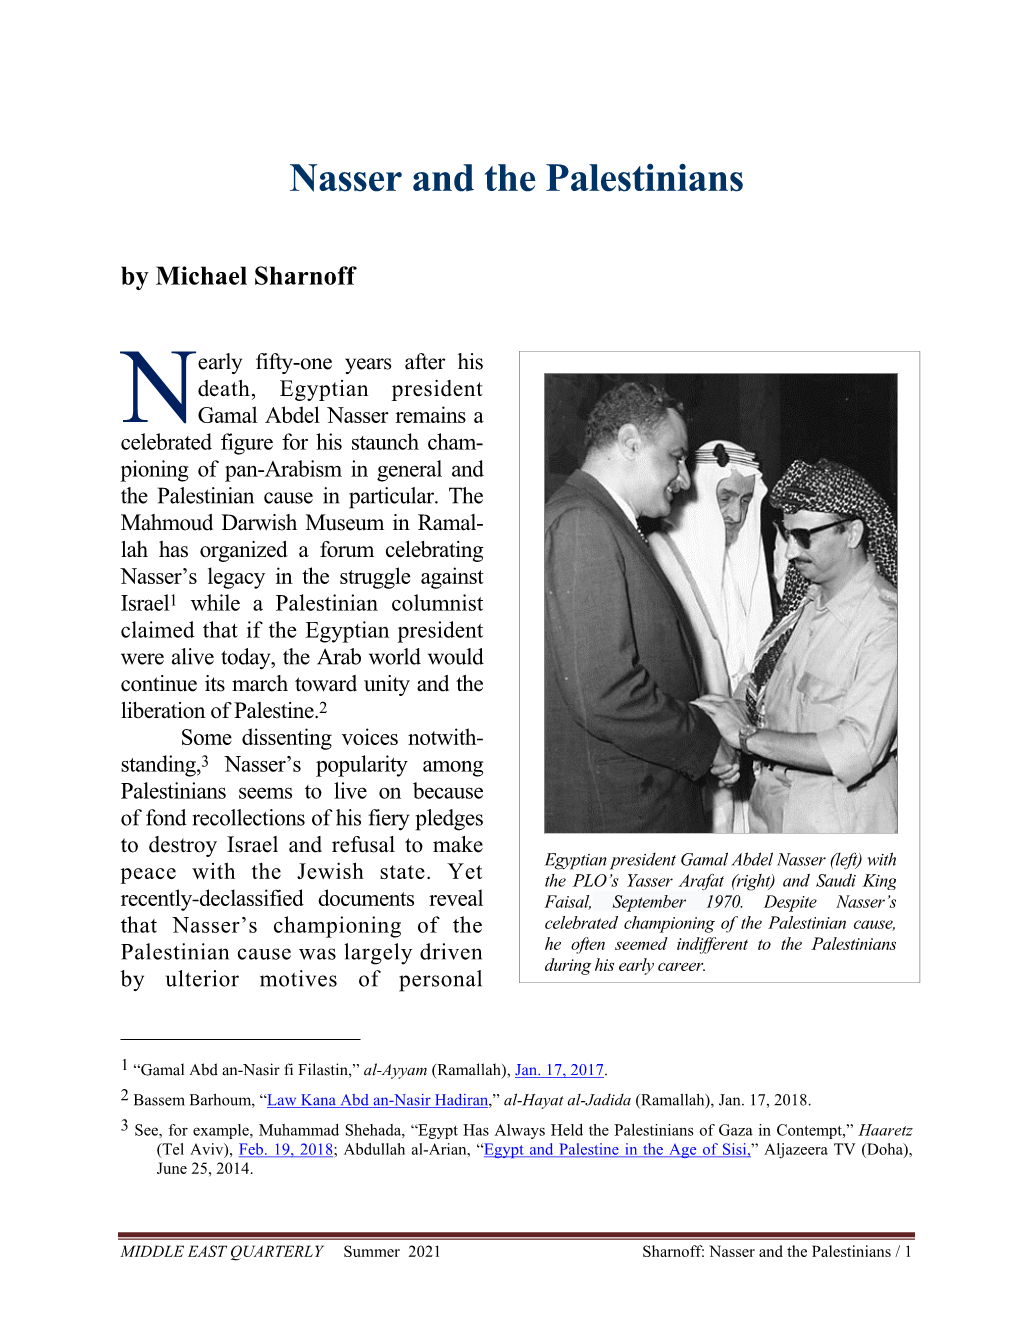 Nasser and the Palestinians by Michael Sharnoff